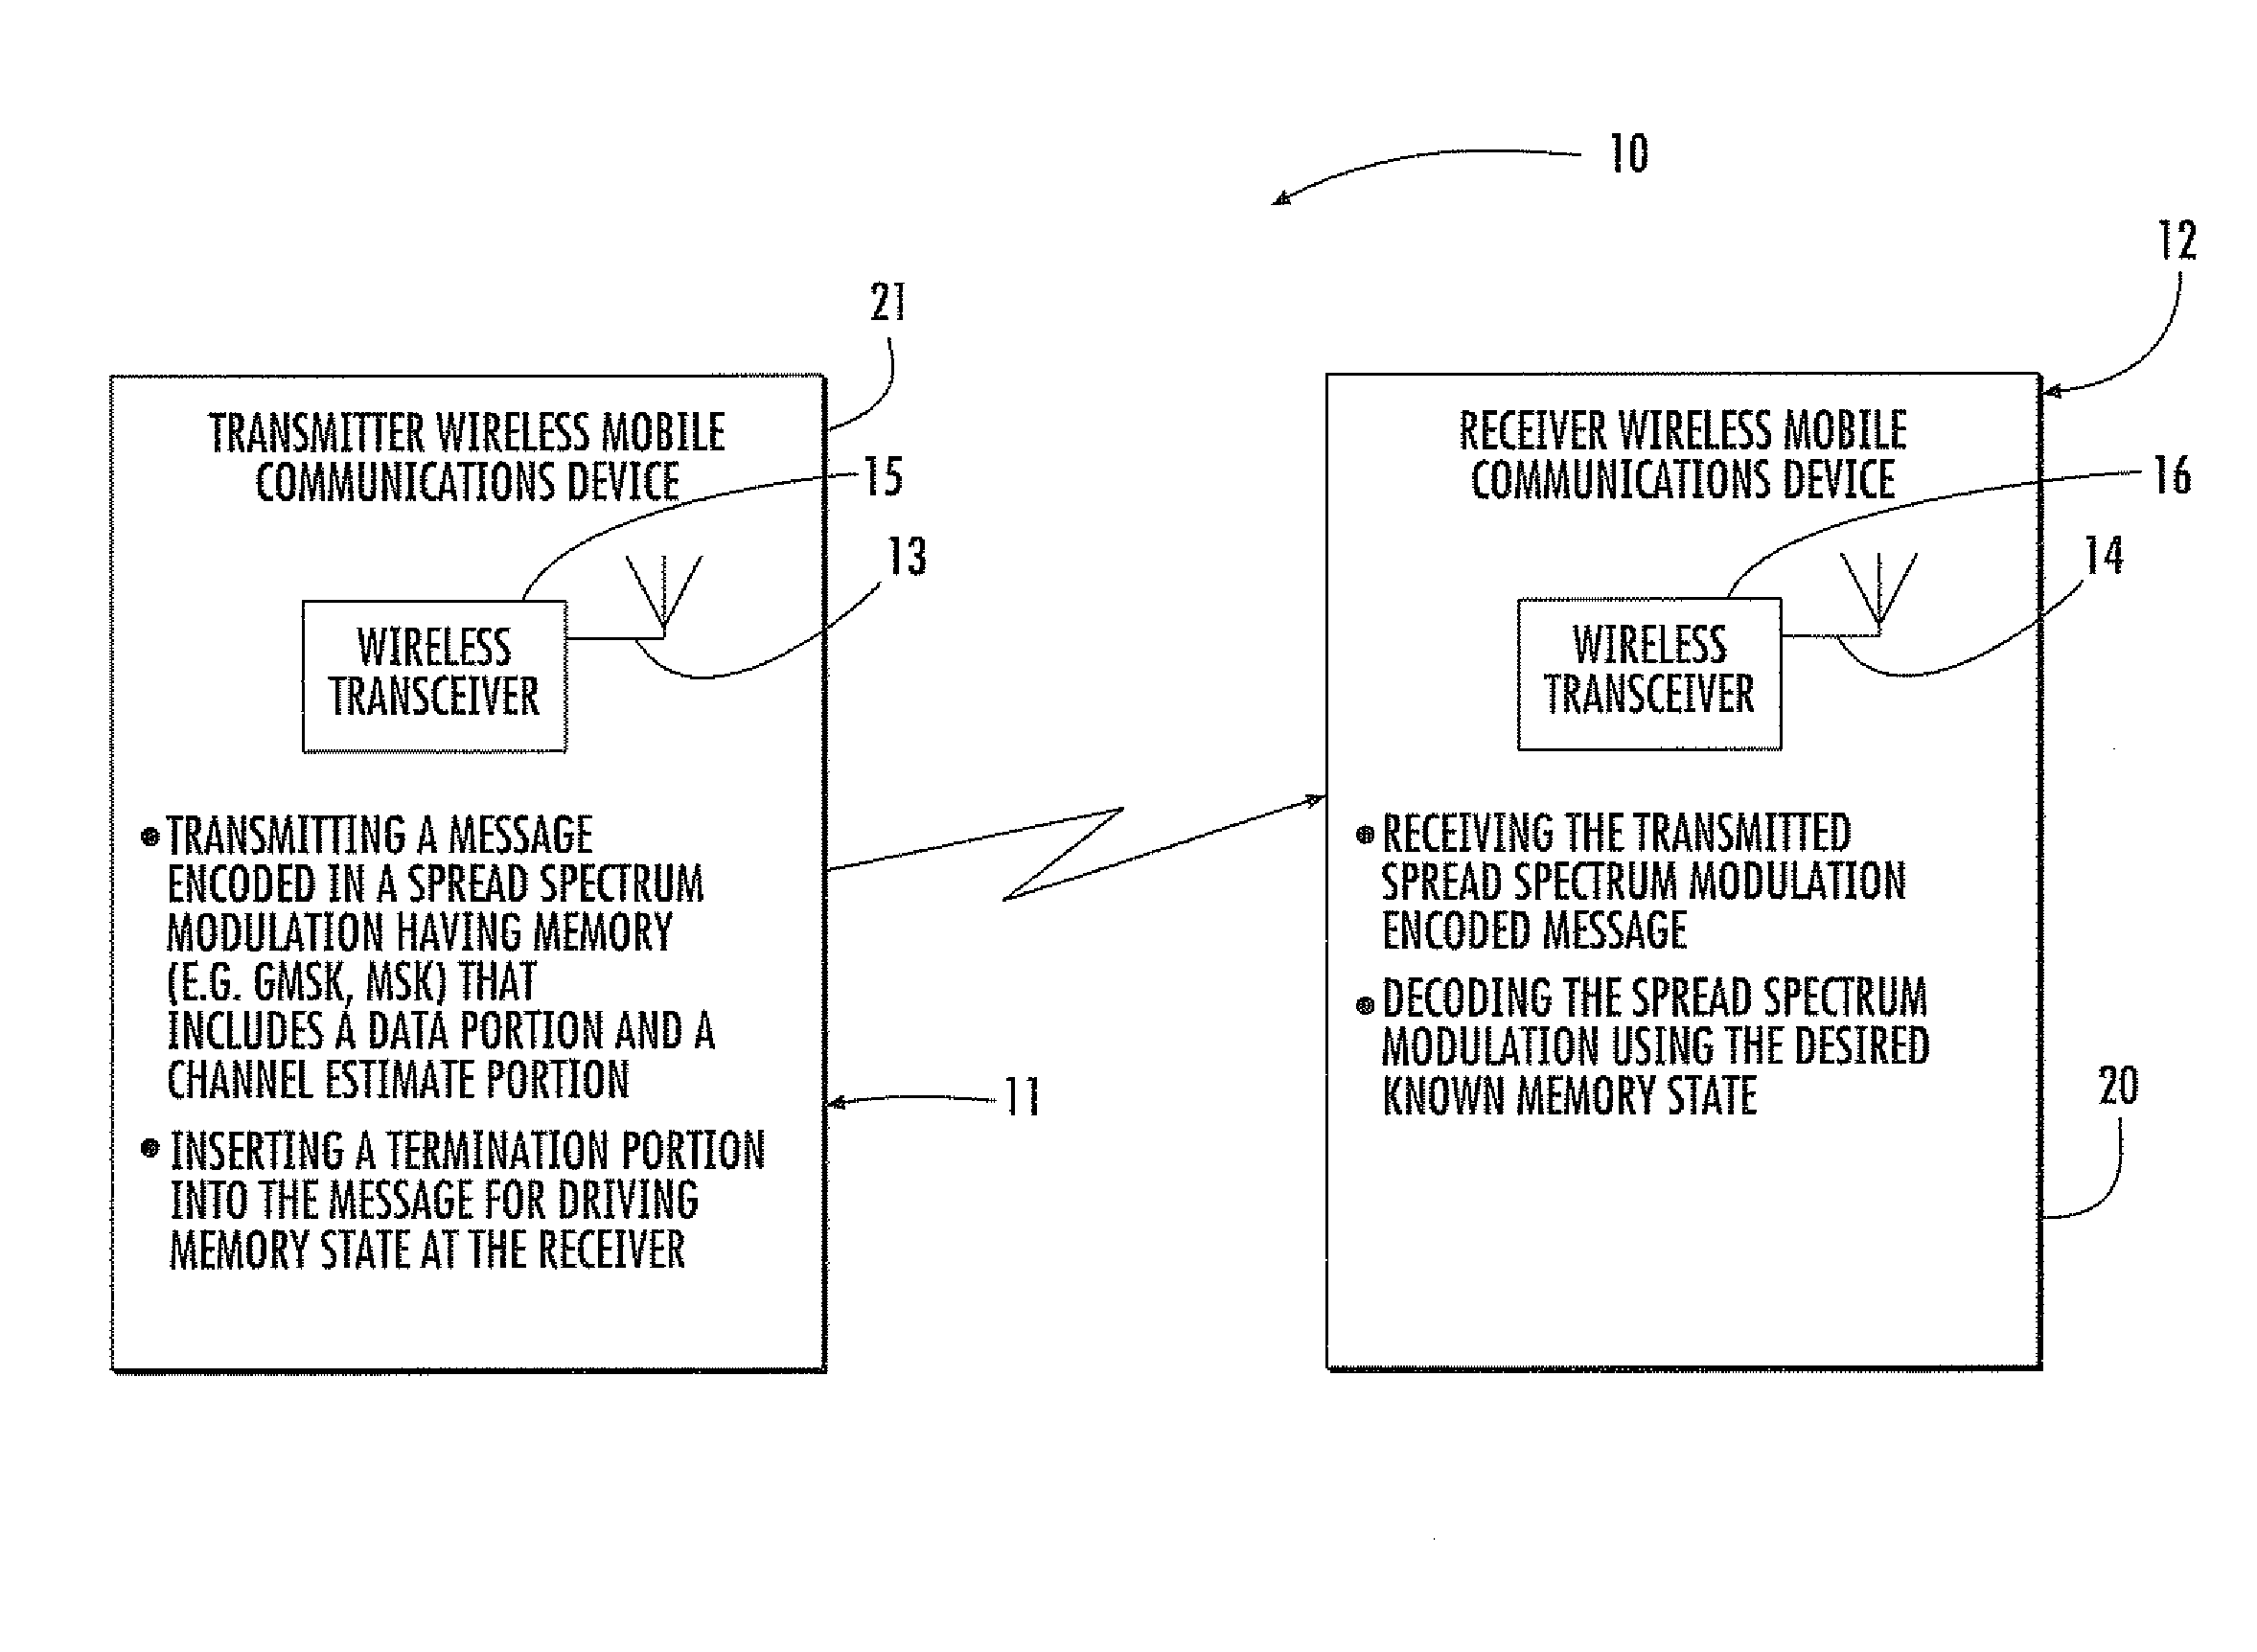 Mobile wireless communications device for modulations with memory